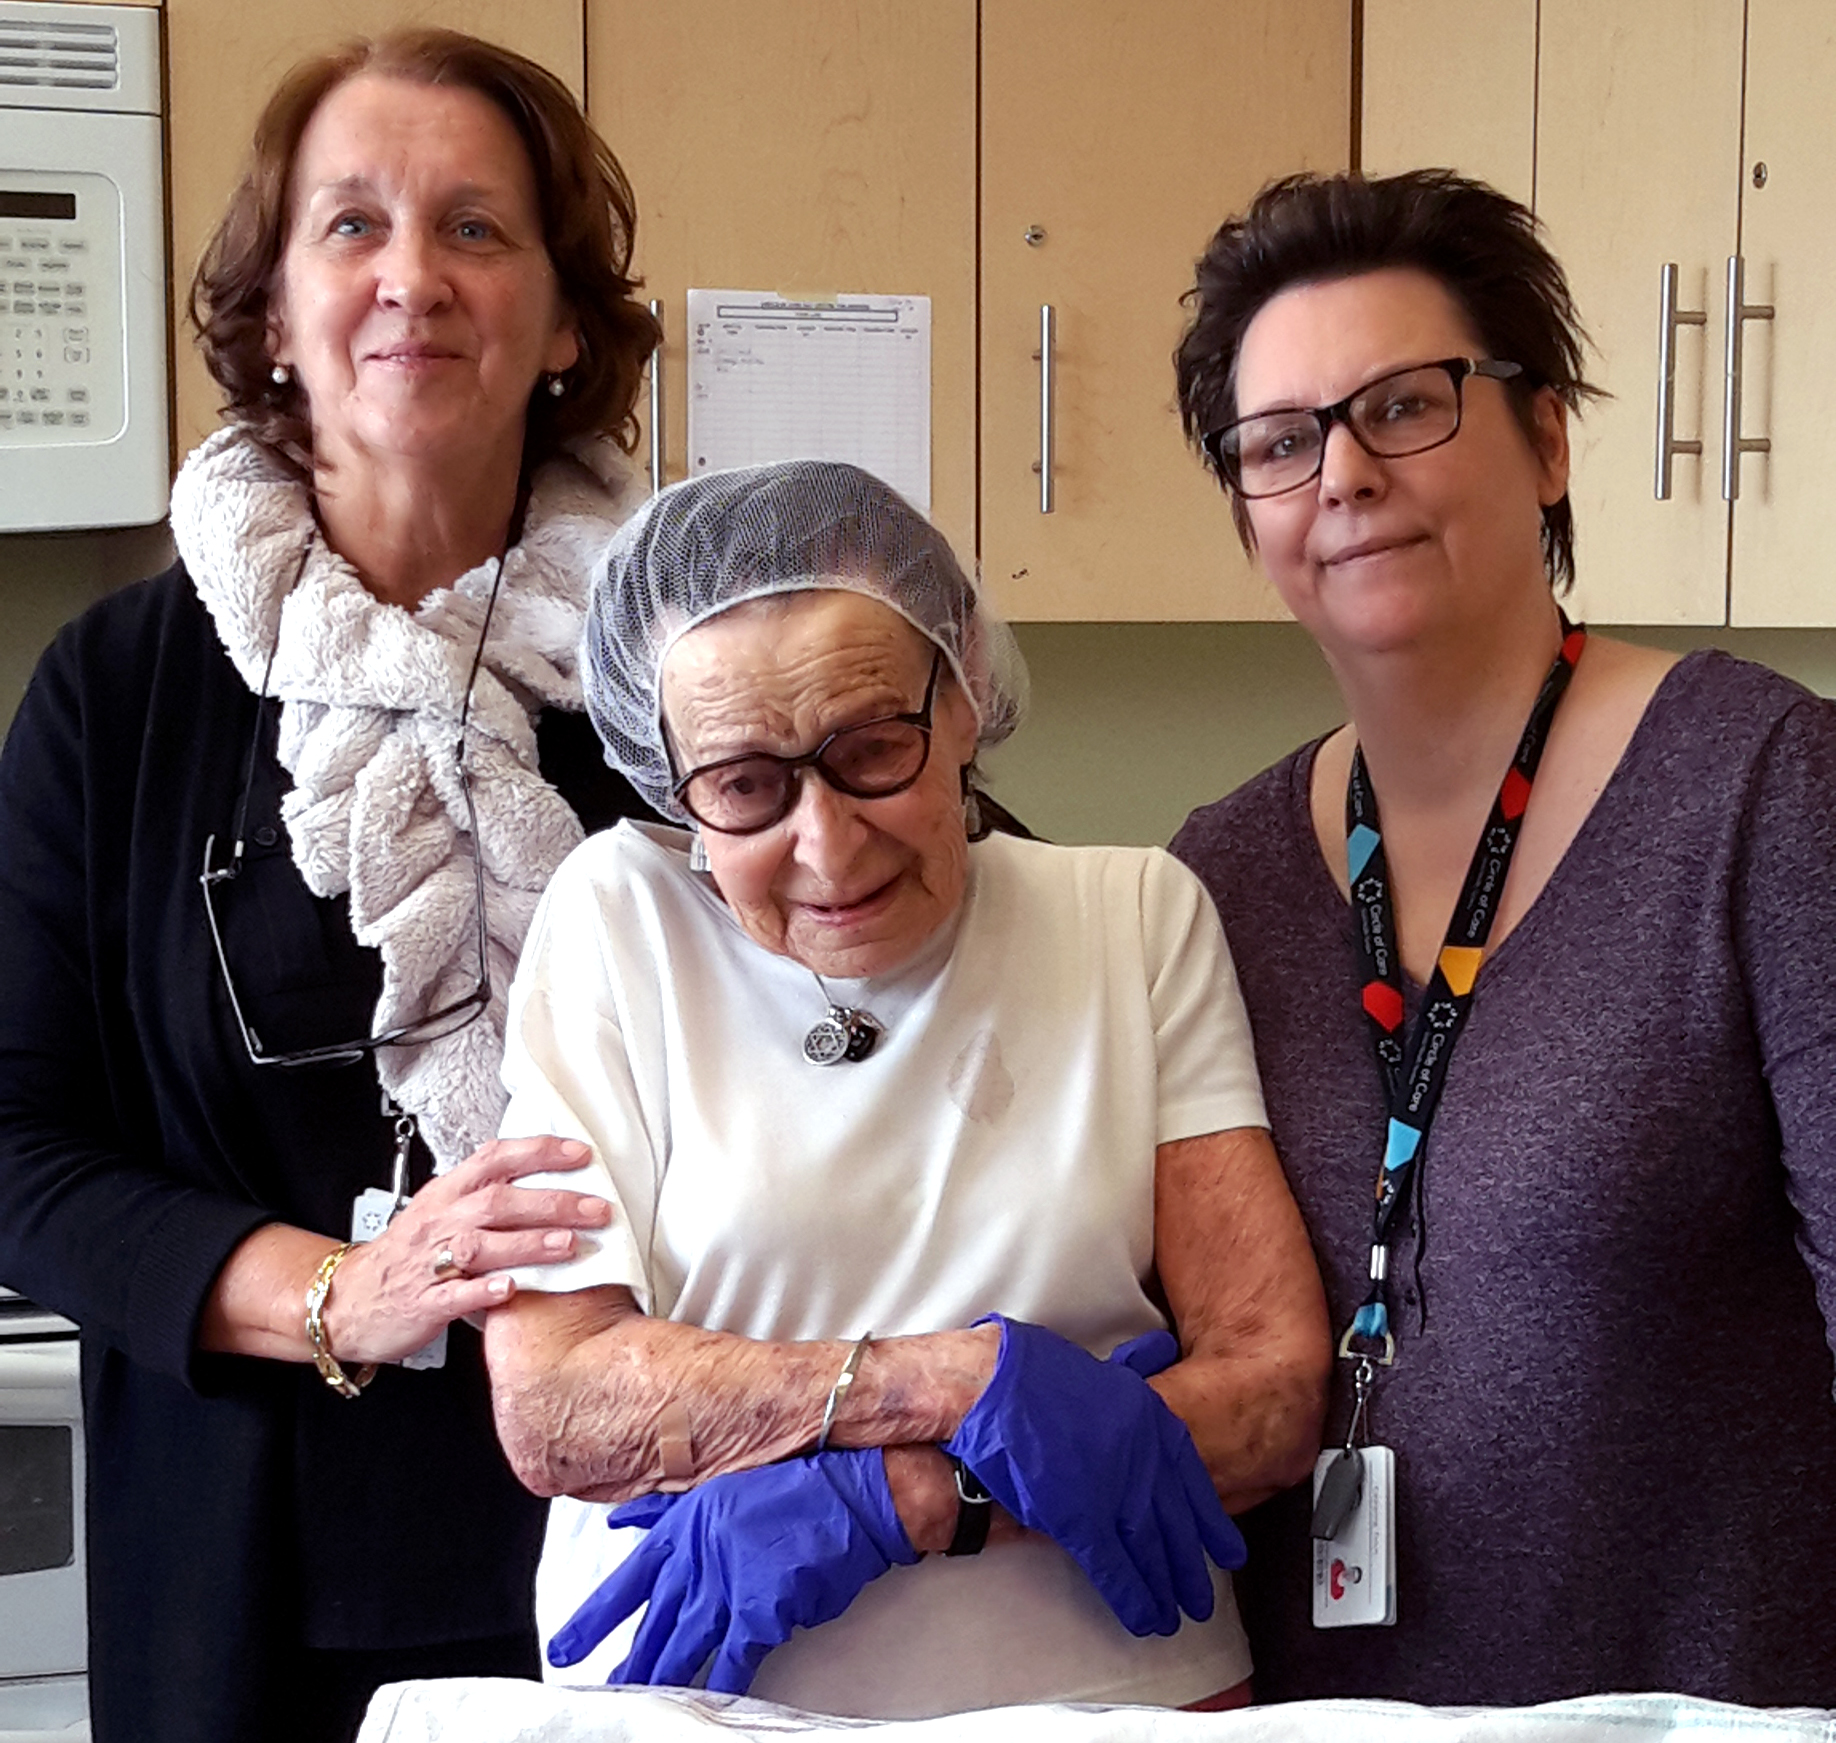 Image of Madeline, Catherine, and volunteer at Adult Day Program